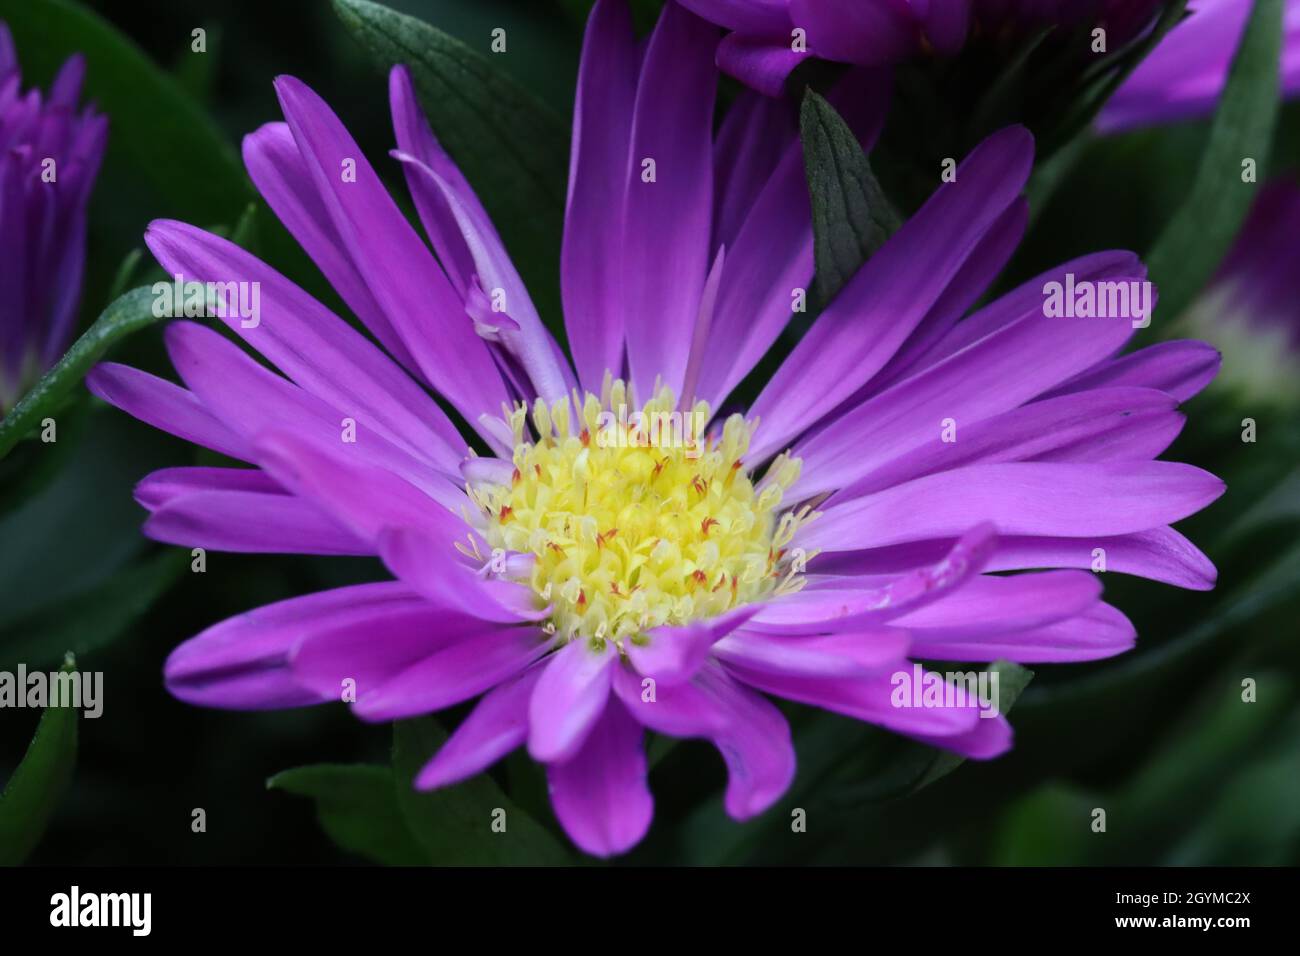 close-up of a pretty violet-blue flower head of an aster against a dark natural background in early autumn Stock Photo